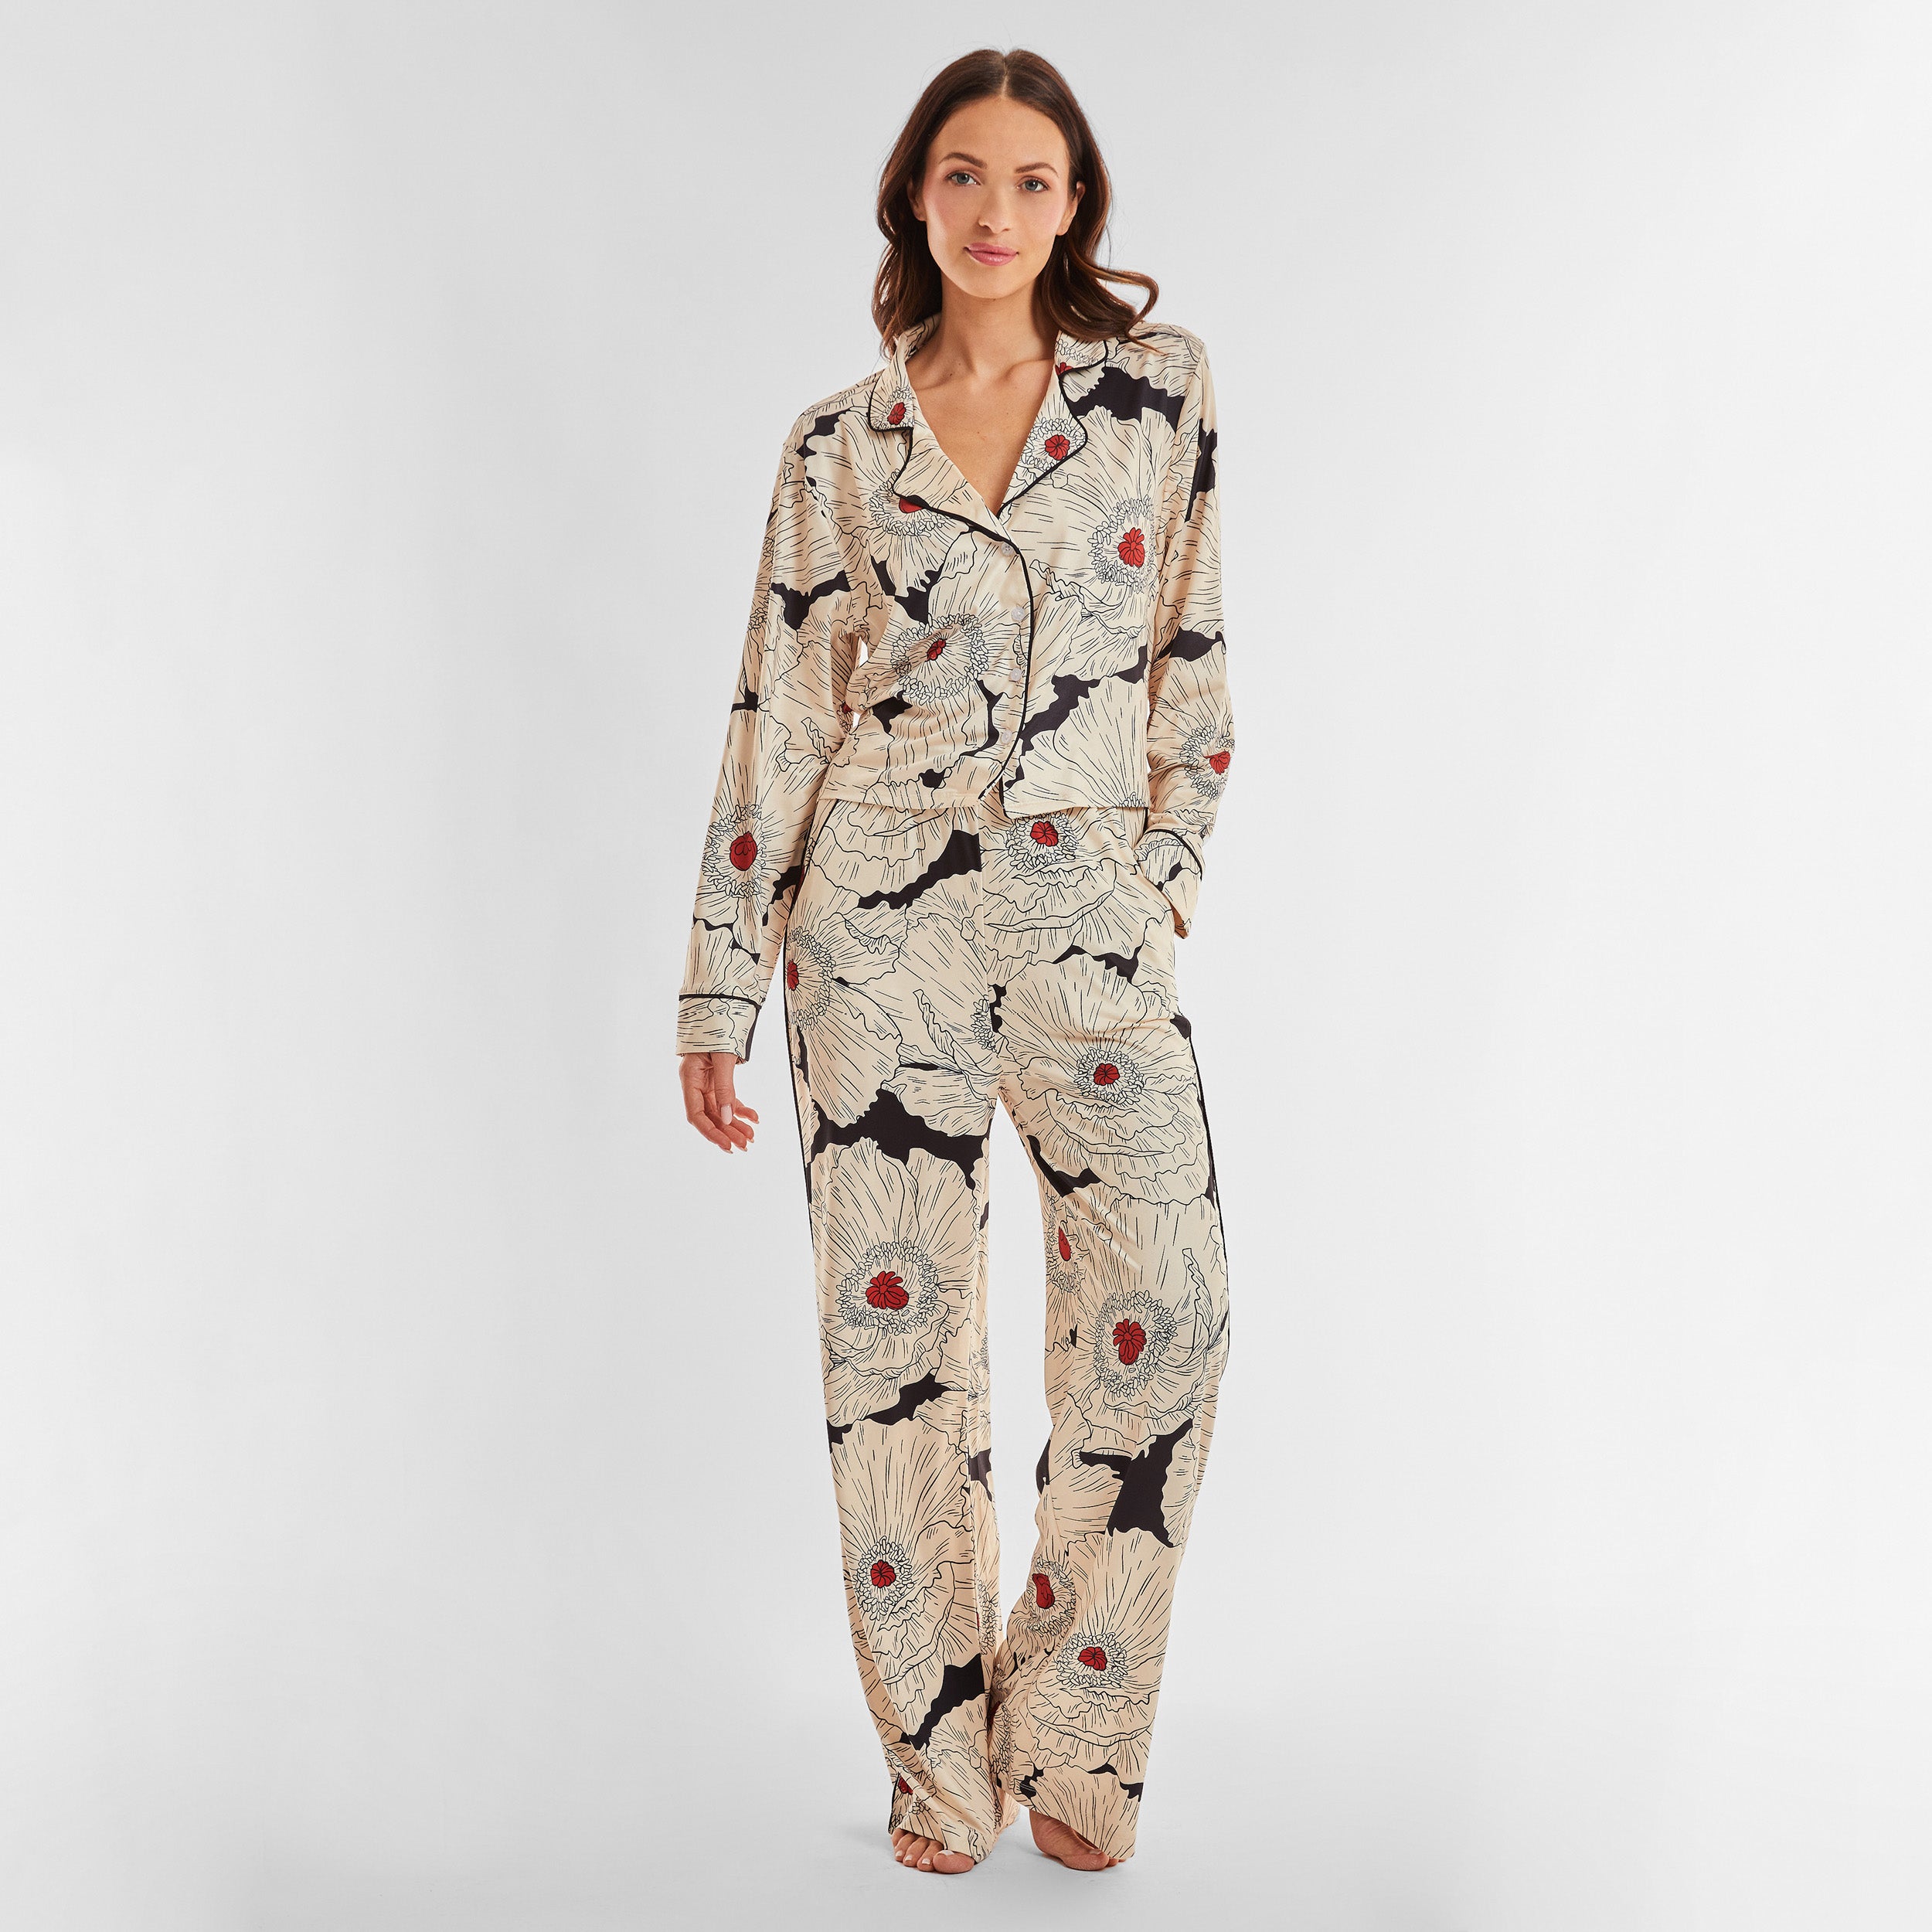 Full view of woman wearing breathable, relaxed and buttery smooth pajama shirt featuring a button front top with notch collar and Poppy Floral print.